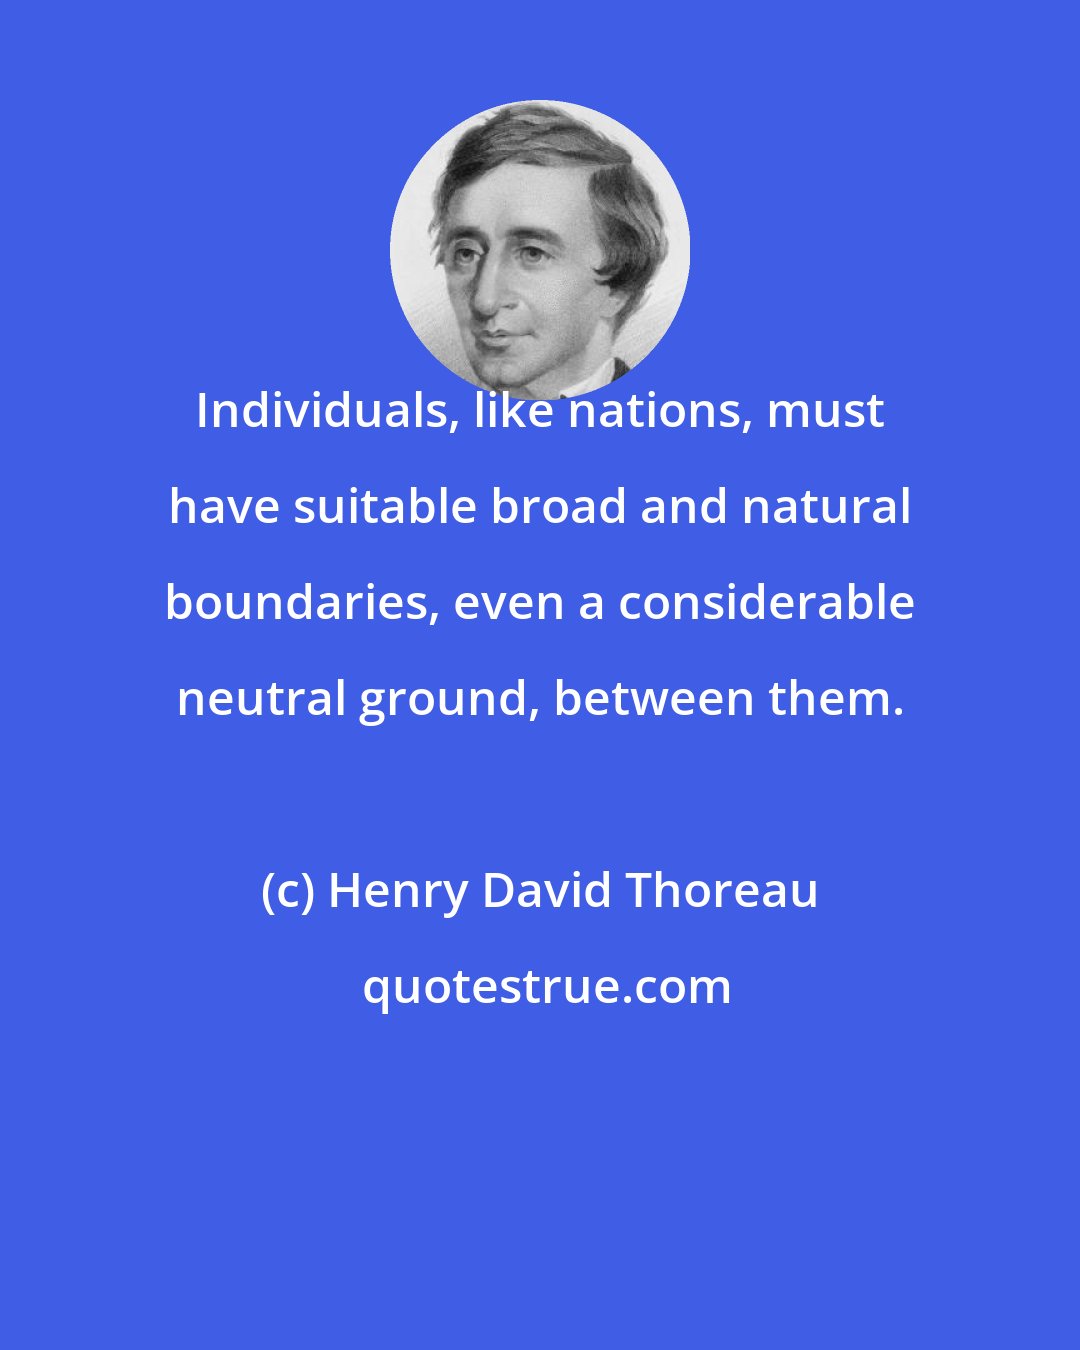 Henry David Thoreau: Individuals, like nations, must have suitable broad and natural boundaries, even a considerable neutral ground, between them.